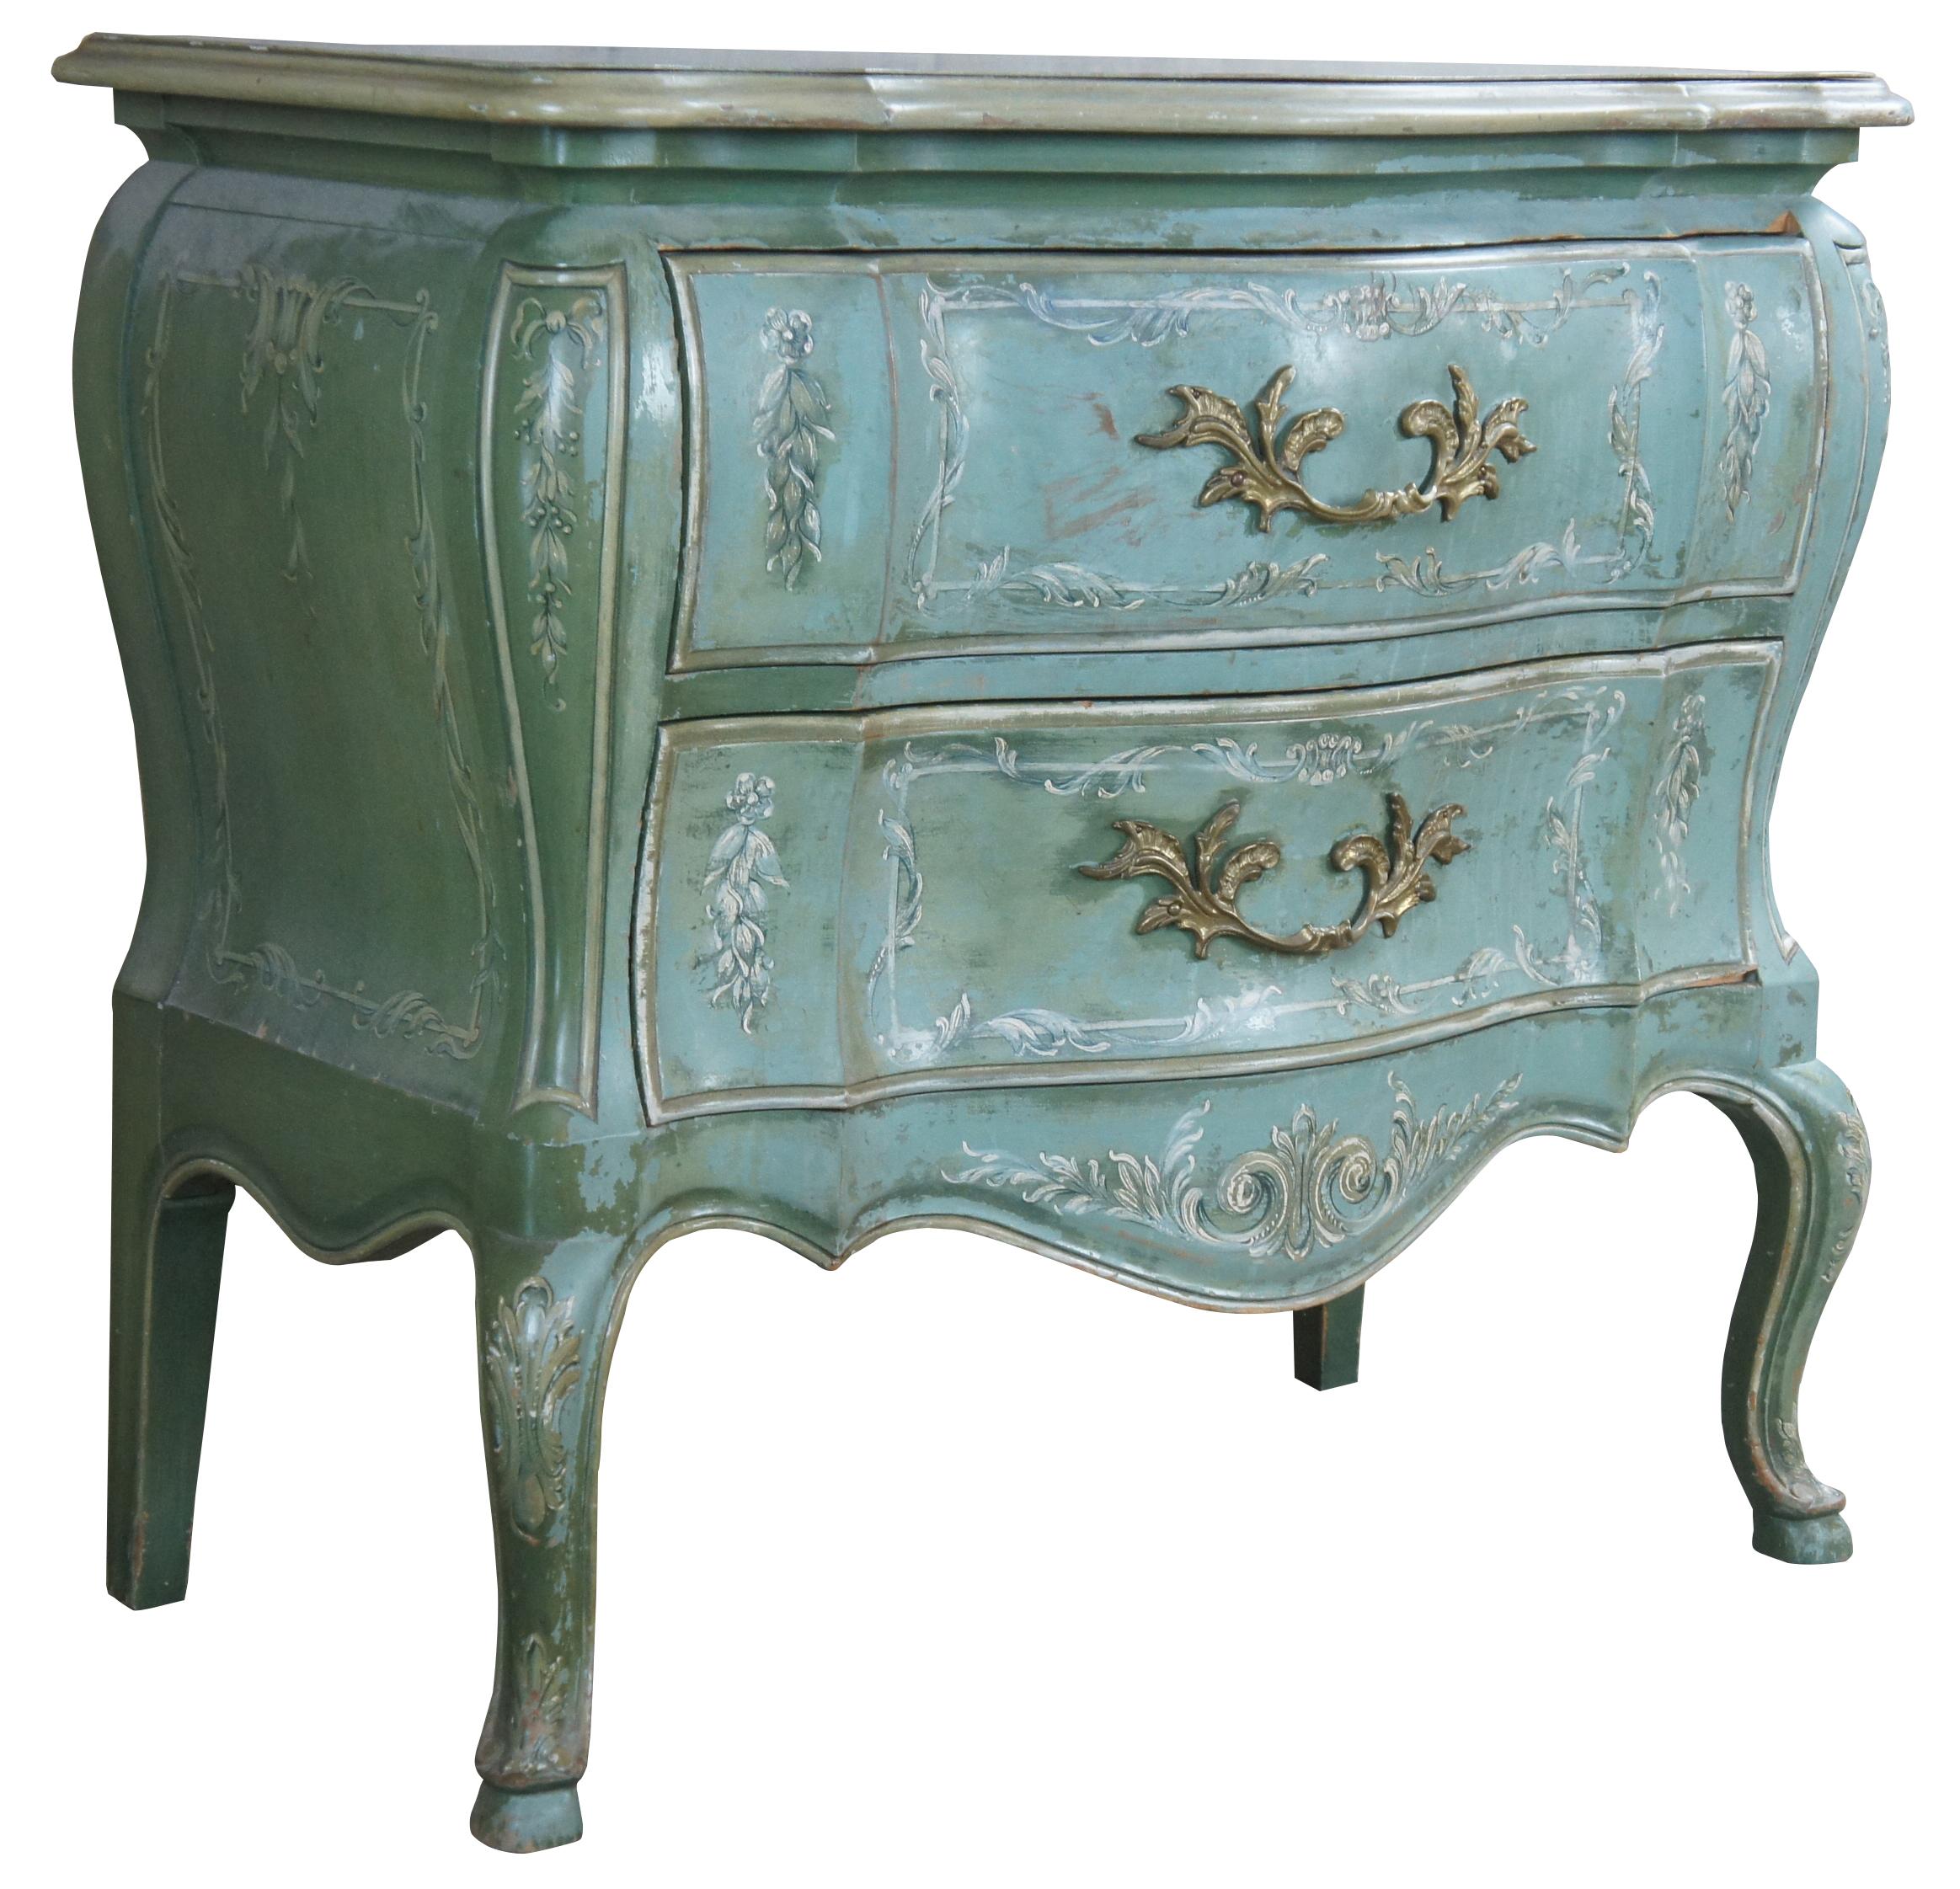 Circa 1960s William A Berkey Chest for John Widdicomb.  A stunning serpentine bombe commode chest with a teal / turquoise / blue green finish.  Includes hand painted accents, brass hardware, dovetailed drawers and cabriole legs.

Berkey, William A.